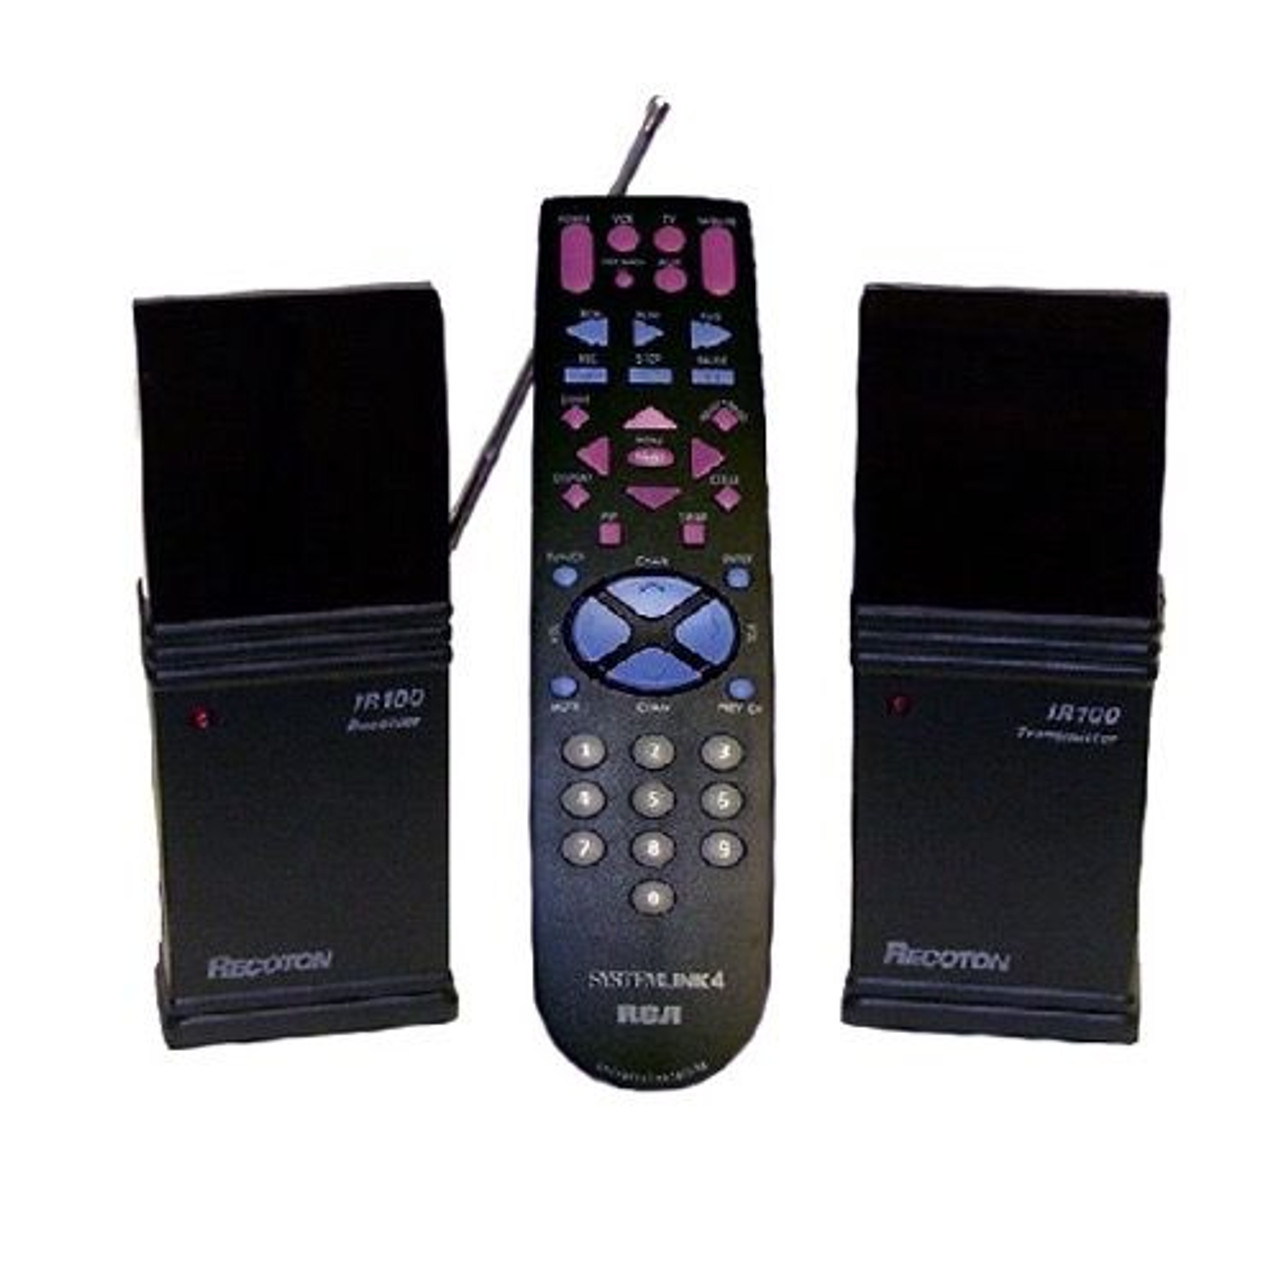 RCA Universal Remote Control Extender Kit Wireless Remote Control Extender and Universal 4 Device Remote Control RCA Systemlink 4 Remote TV System Control, Remote Range RF Frequency 418 MHz